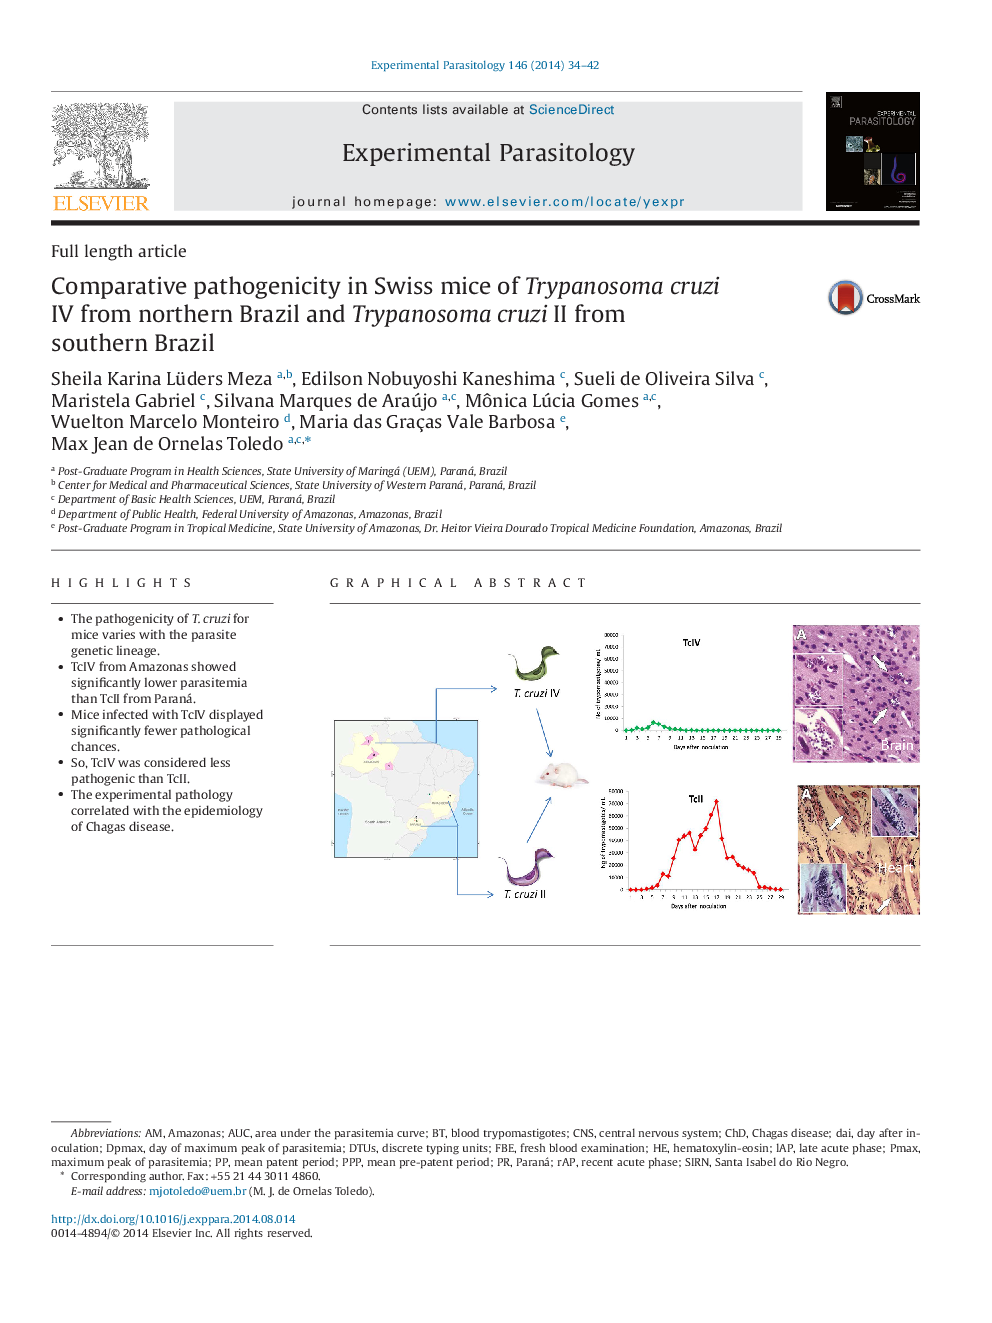 Comparative pathogenicity in Swiss mice of Trypanosoma cruzi IV from northern Brazil and Trypanosoma cruzi II from southern Brazil